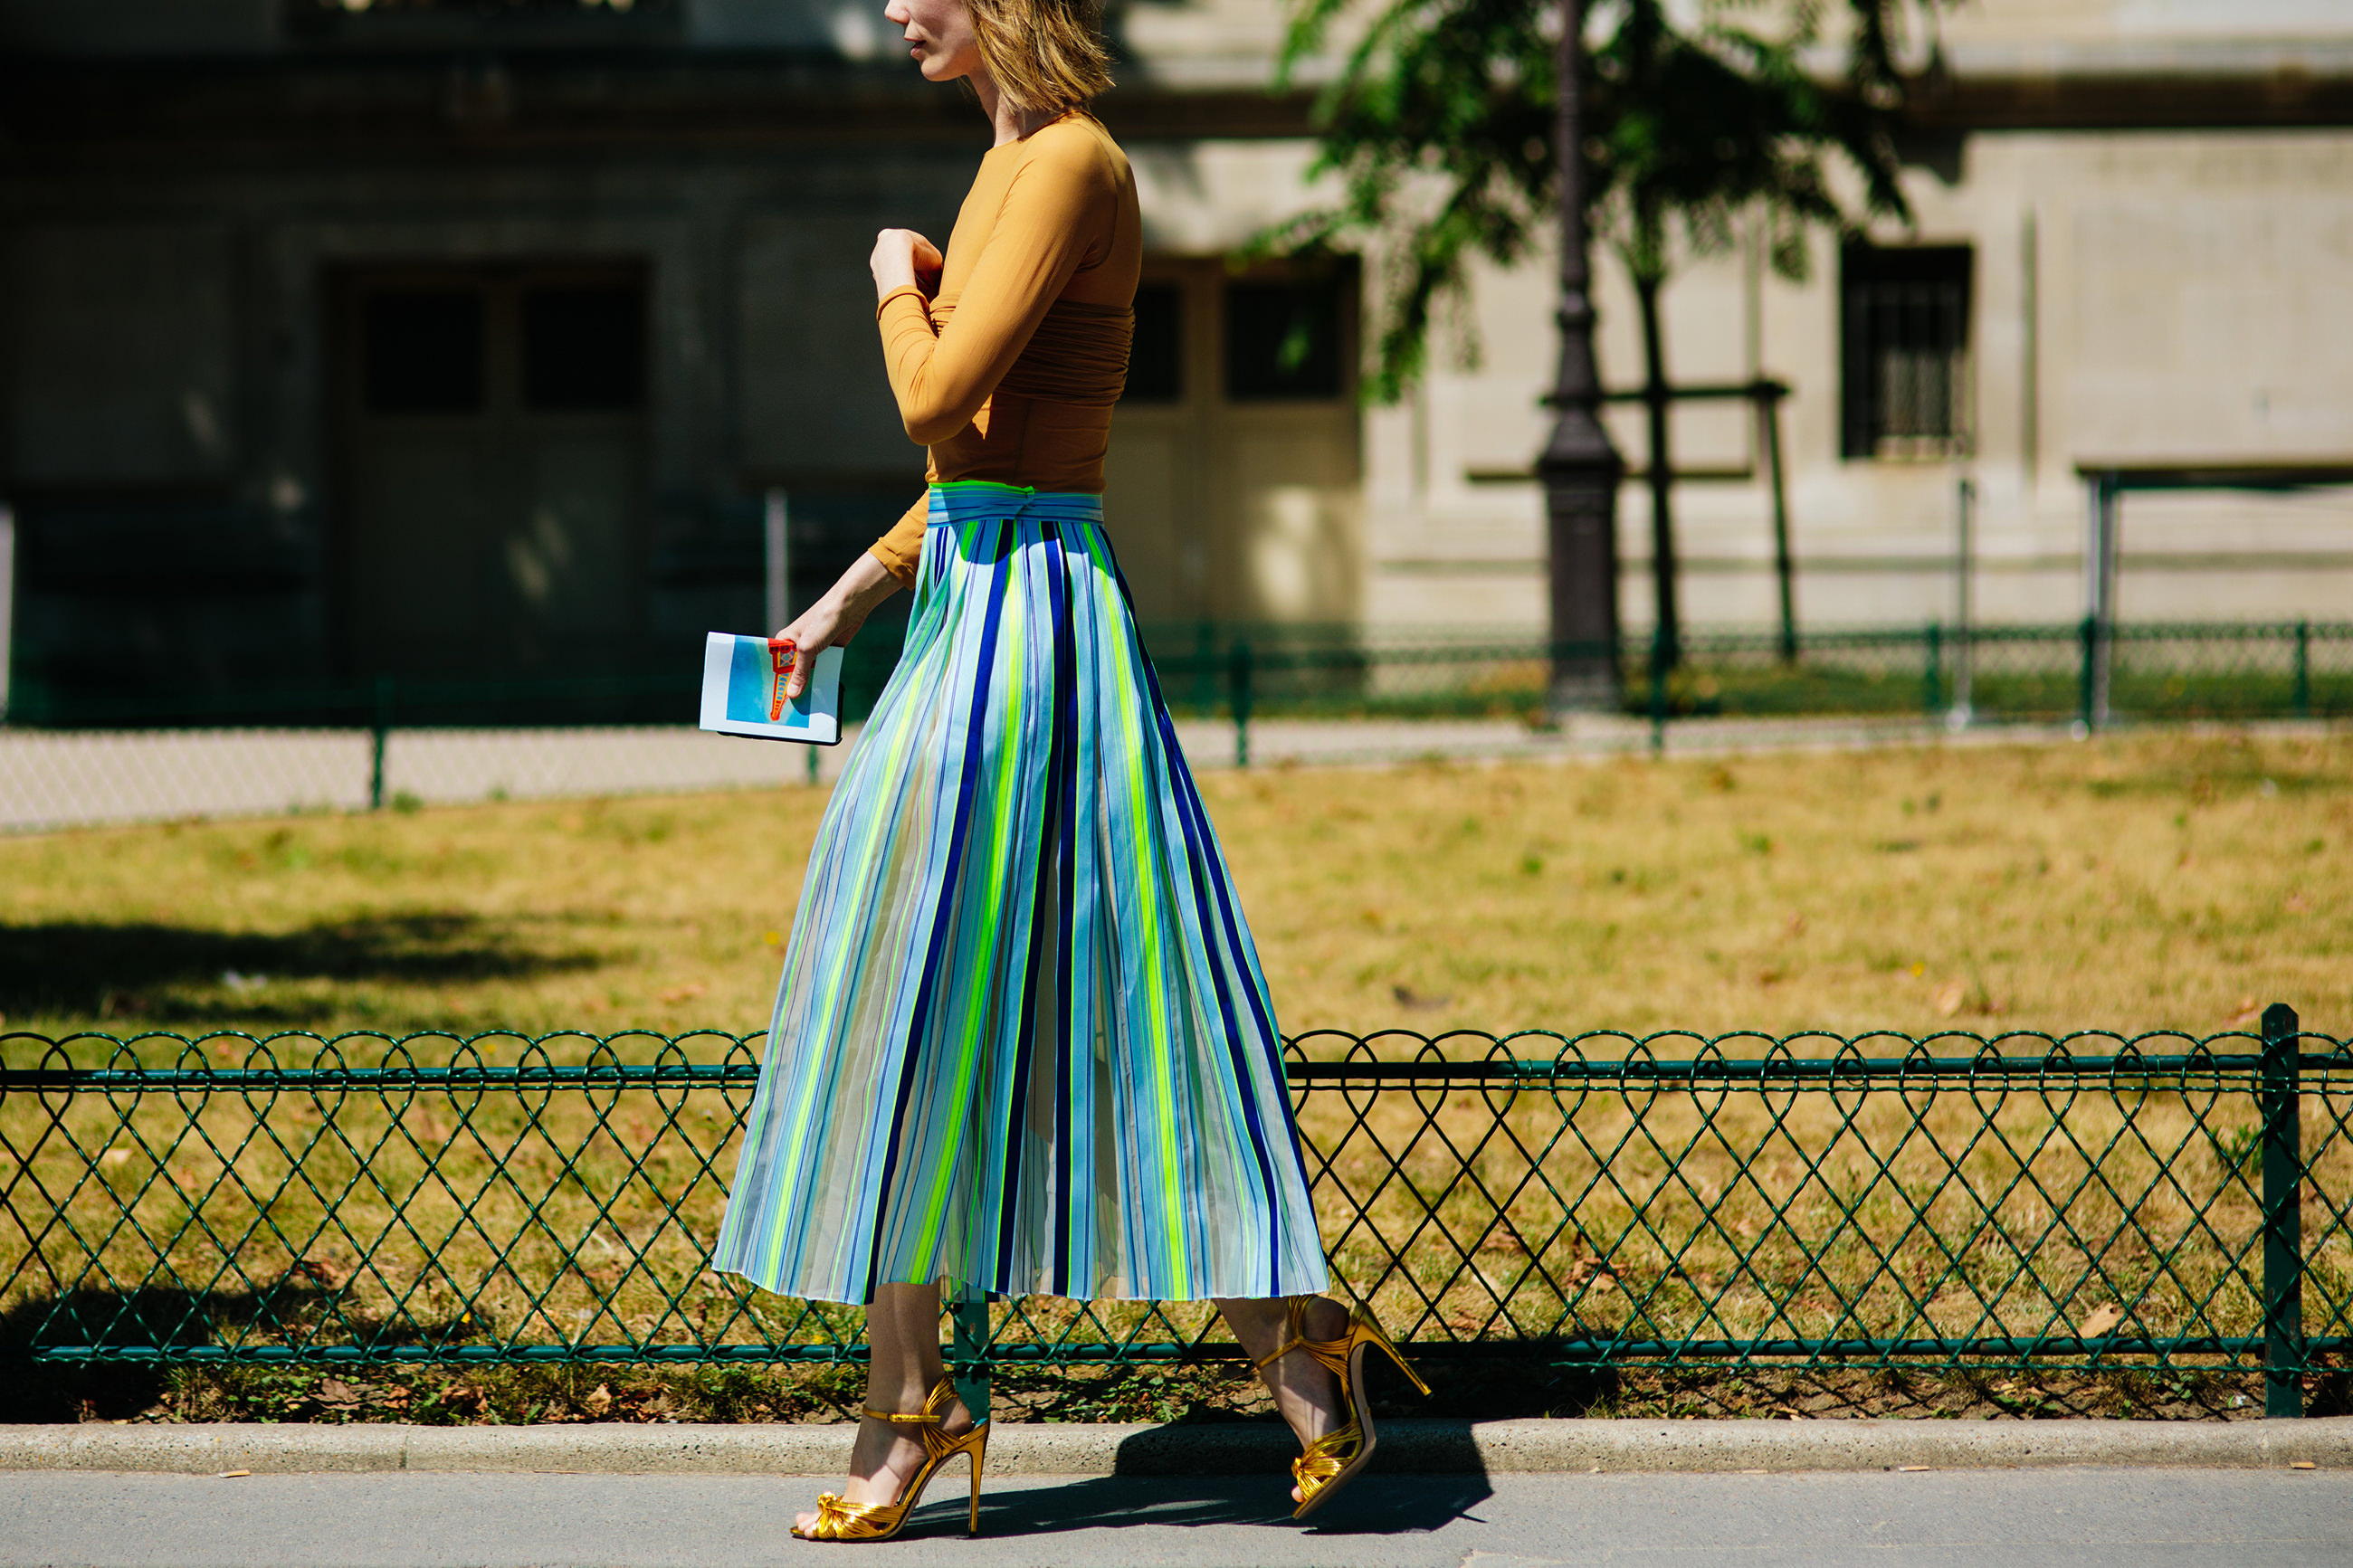 Anya Ziourova wearing a pleated skirt and top by Vika Gazinskaya and Gucci heels before the Chanel HC fashion show in Paris, France